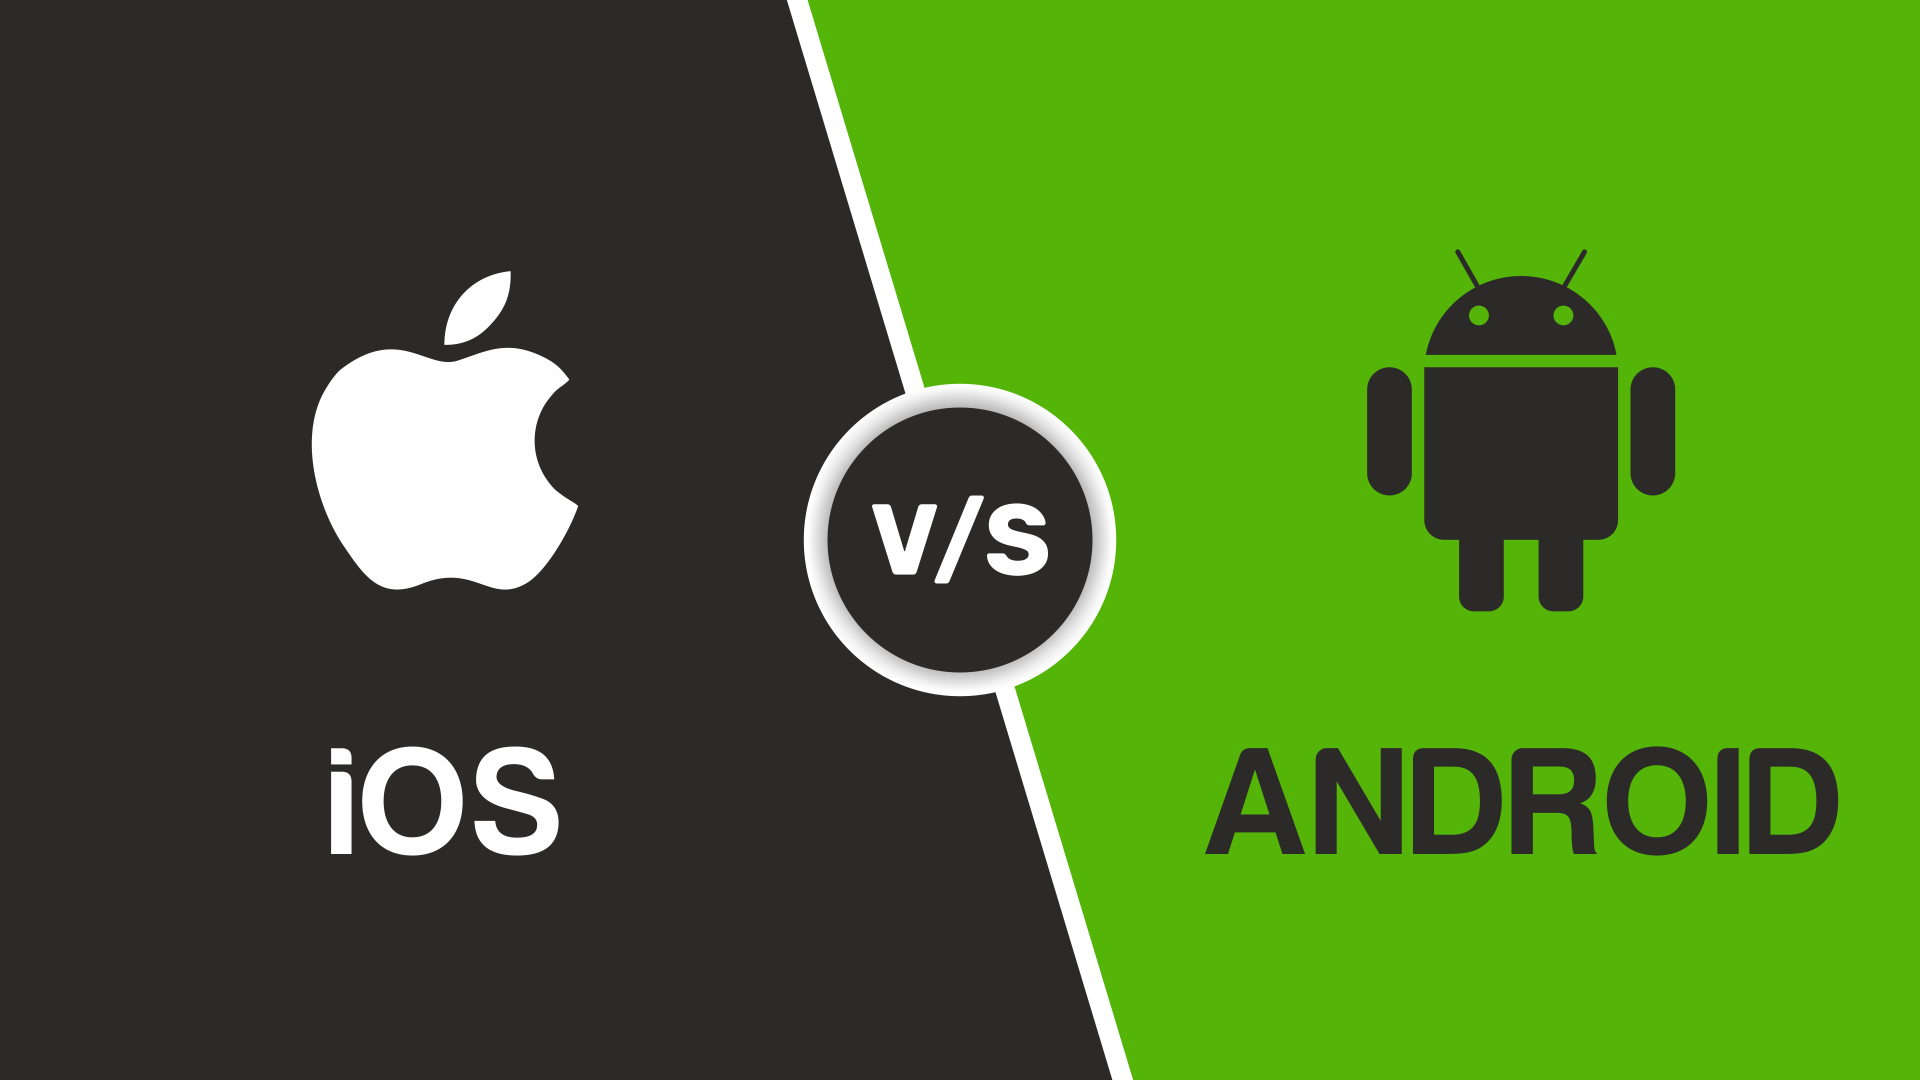 iOS vs Android Security Comparison